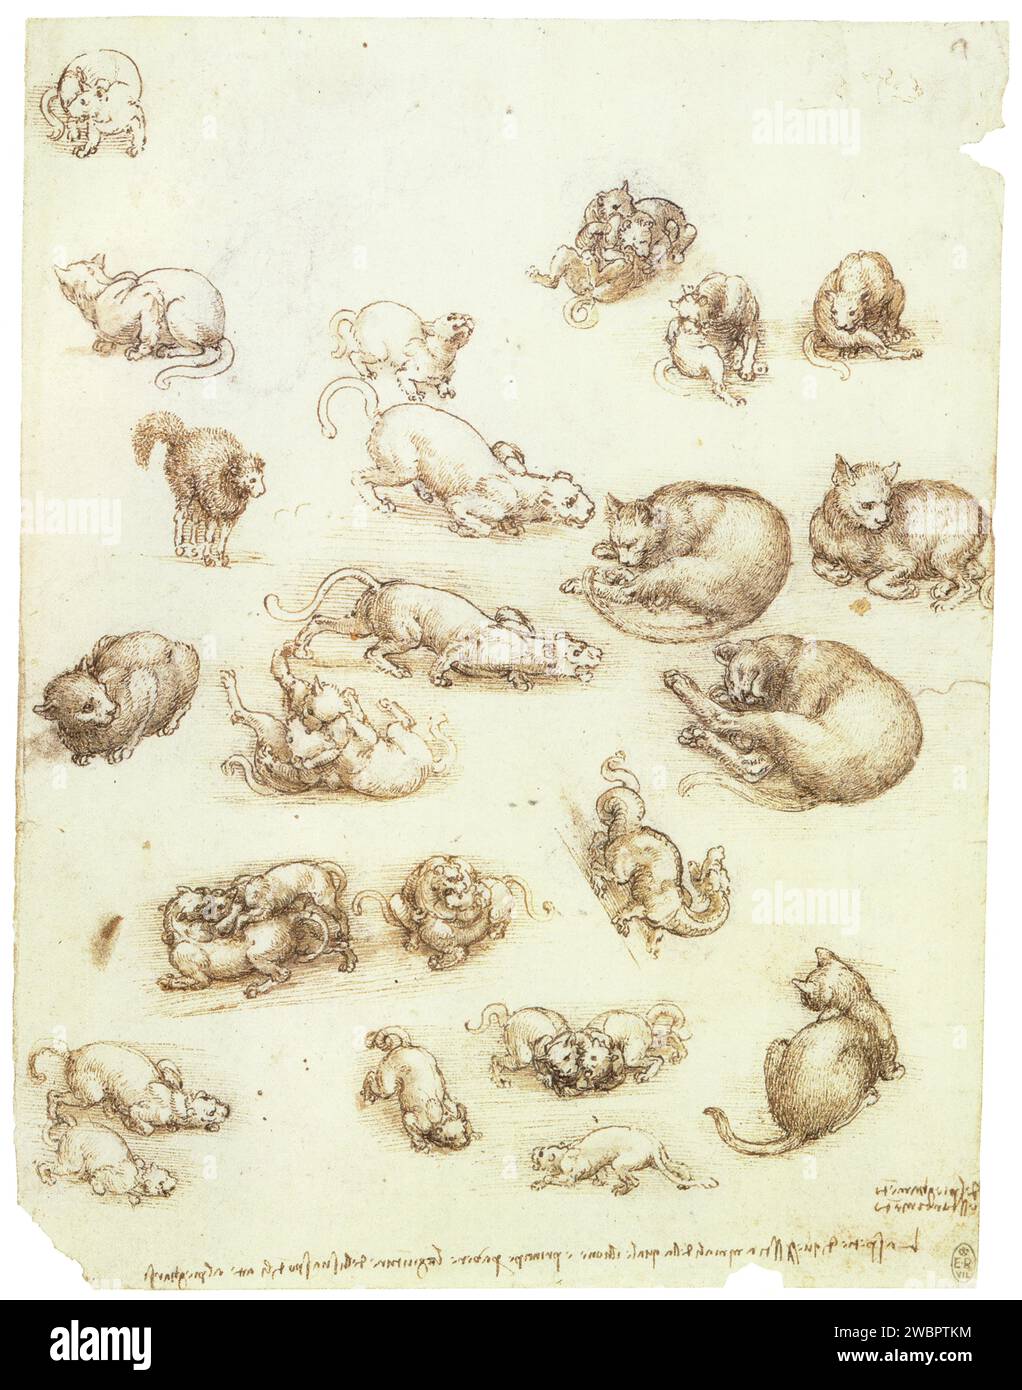 LEONARDO DA VINCI.STUDIES OF CATS.A DRAGON AND OTHER ANIMALS.1513-1515.PEN AND INK AND WASH OVER CHALK.271 MM X 204 MM Foto Stock